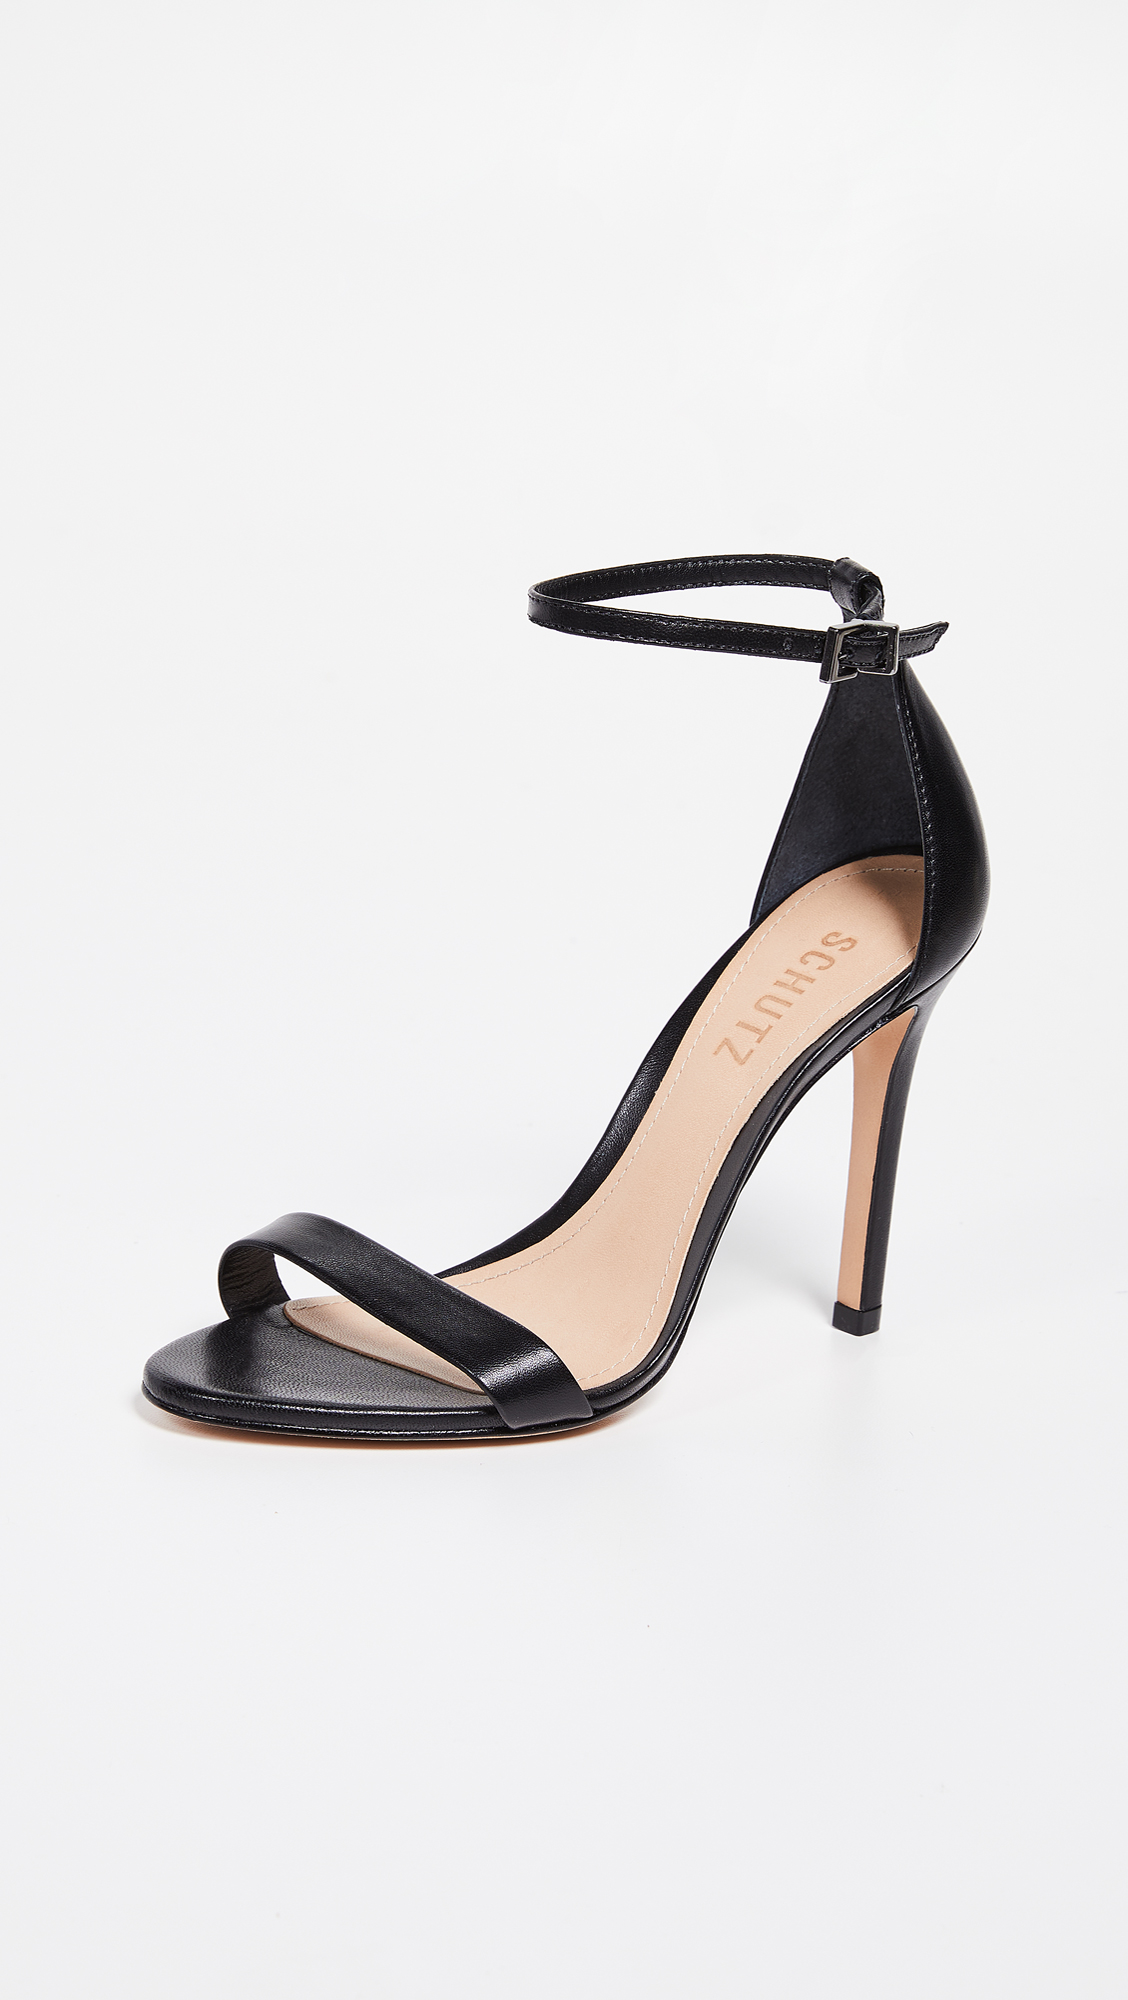 The 25 Best Black Heels and Pumps With 